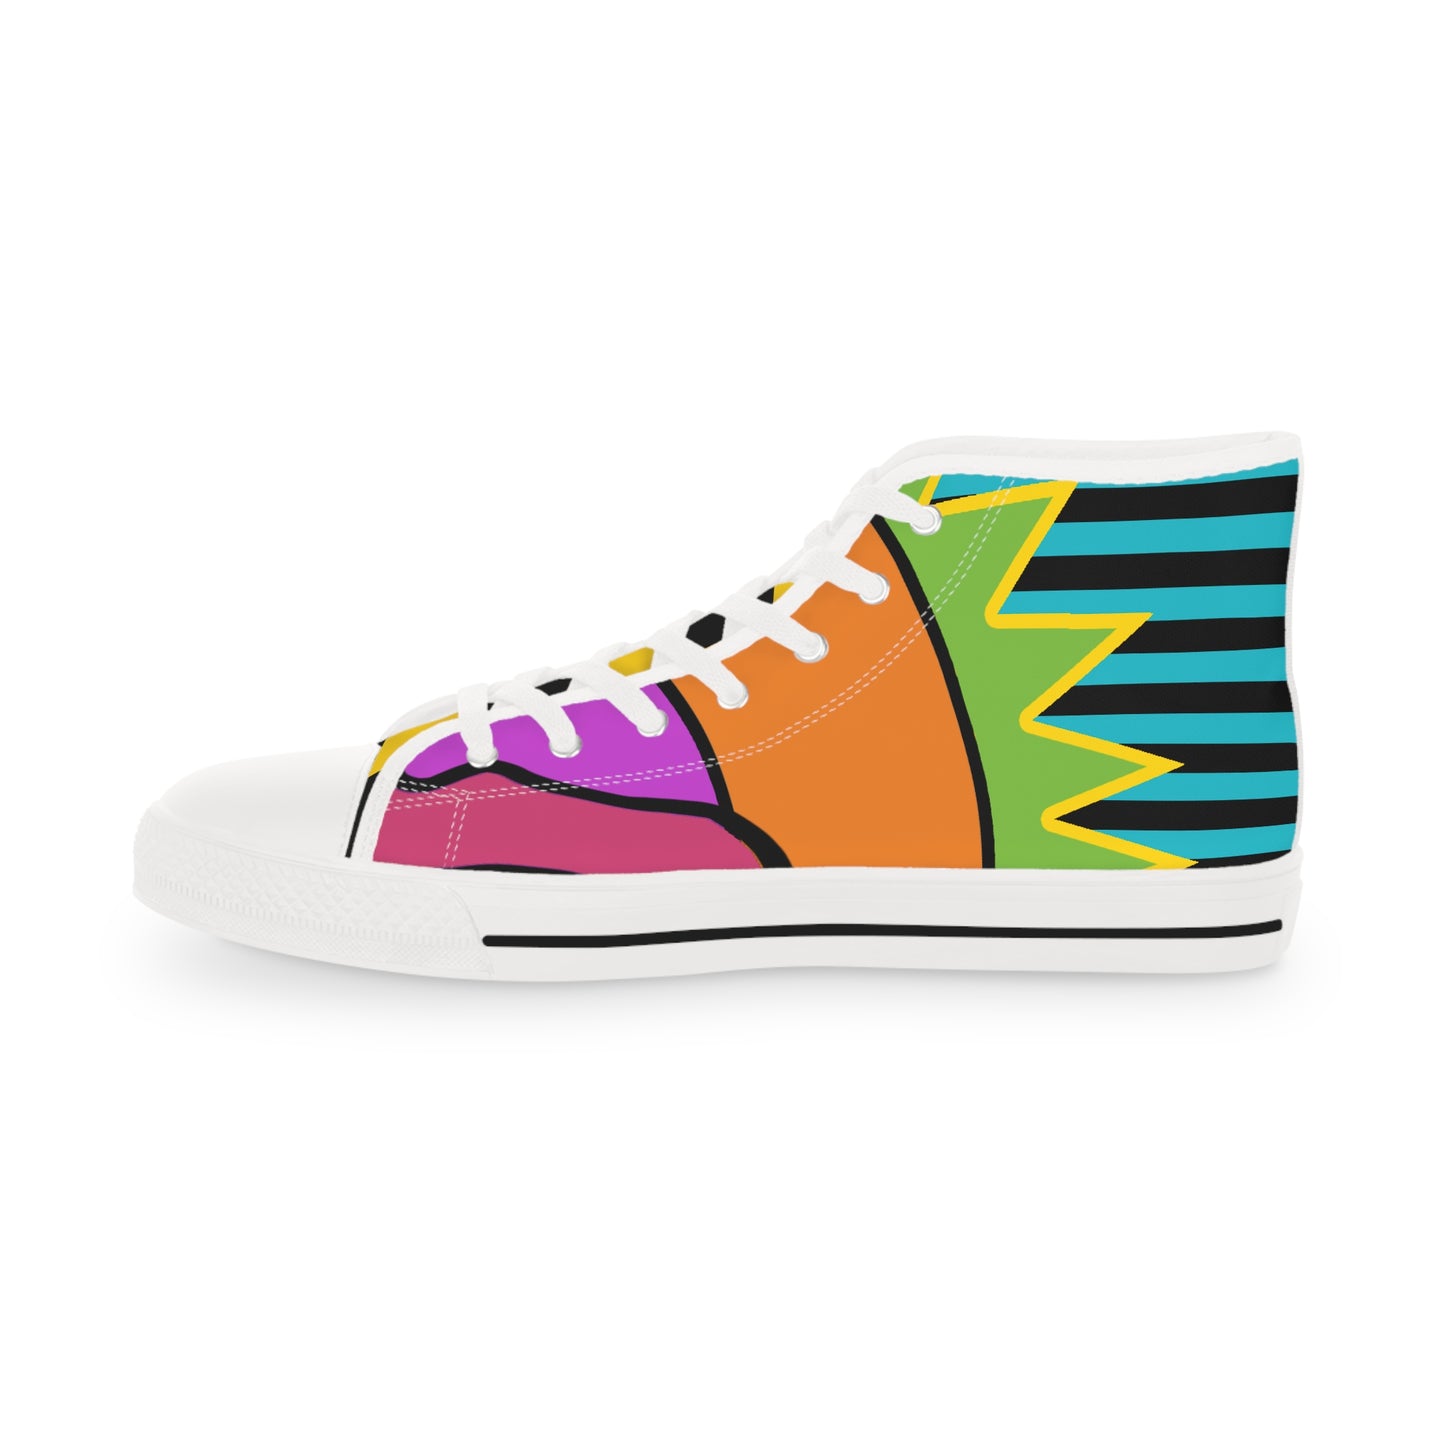 Men's High Top Graphics Sneakers - 10003 US 14 White sole